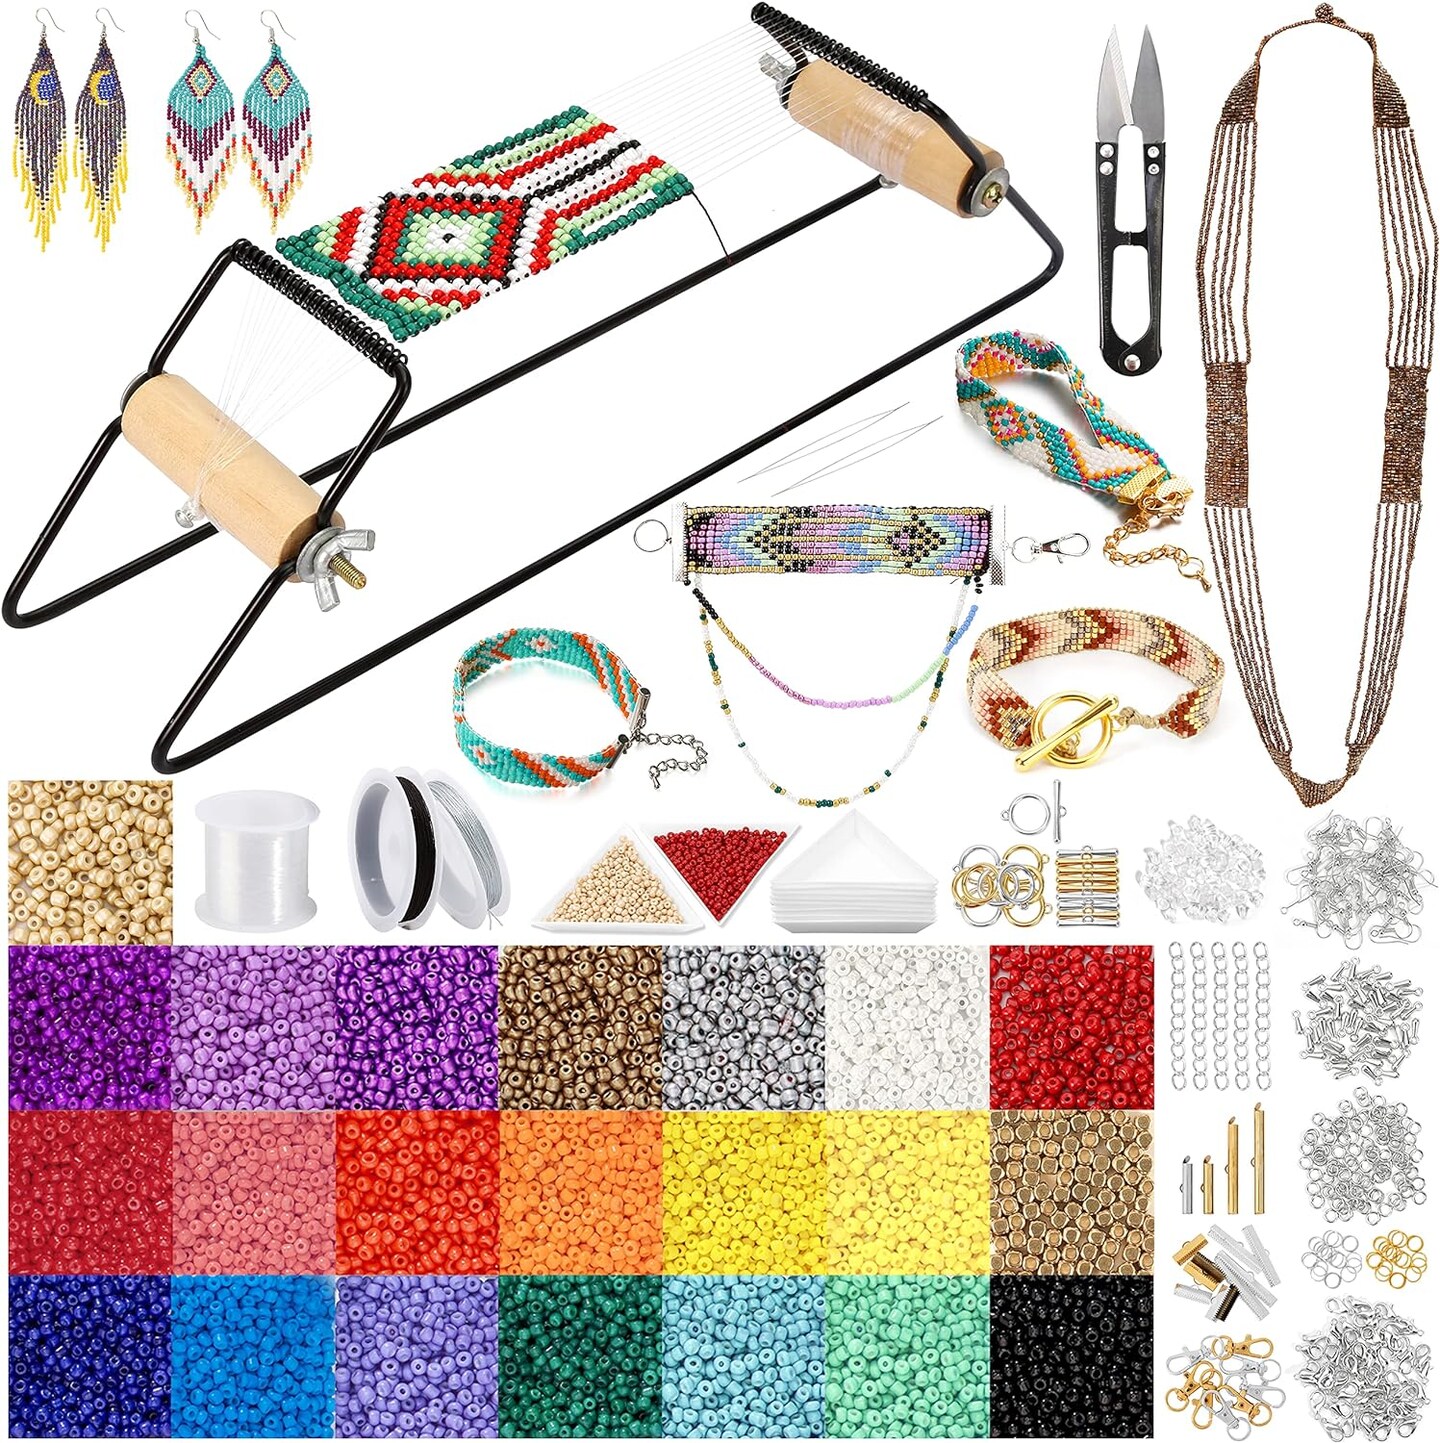 Value Bead Loom Kit, 11343 PCS Loom Beading Supplies with Lots of Seed Beads, Complete Jewelry Making Tools and Accessories, Beading Loom Kits for Adults Jewelry Making Bracelets Belts